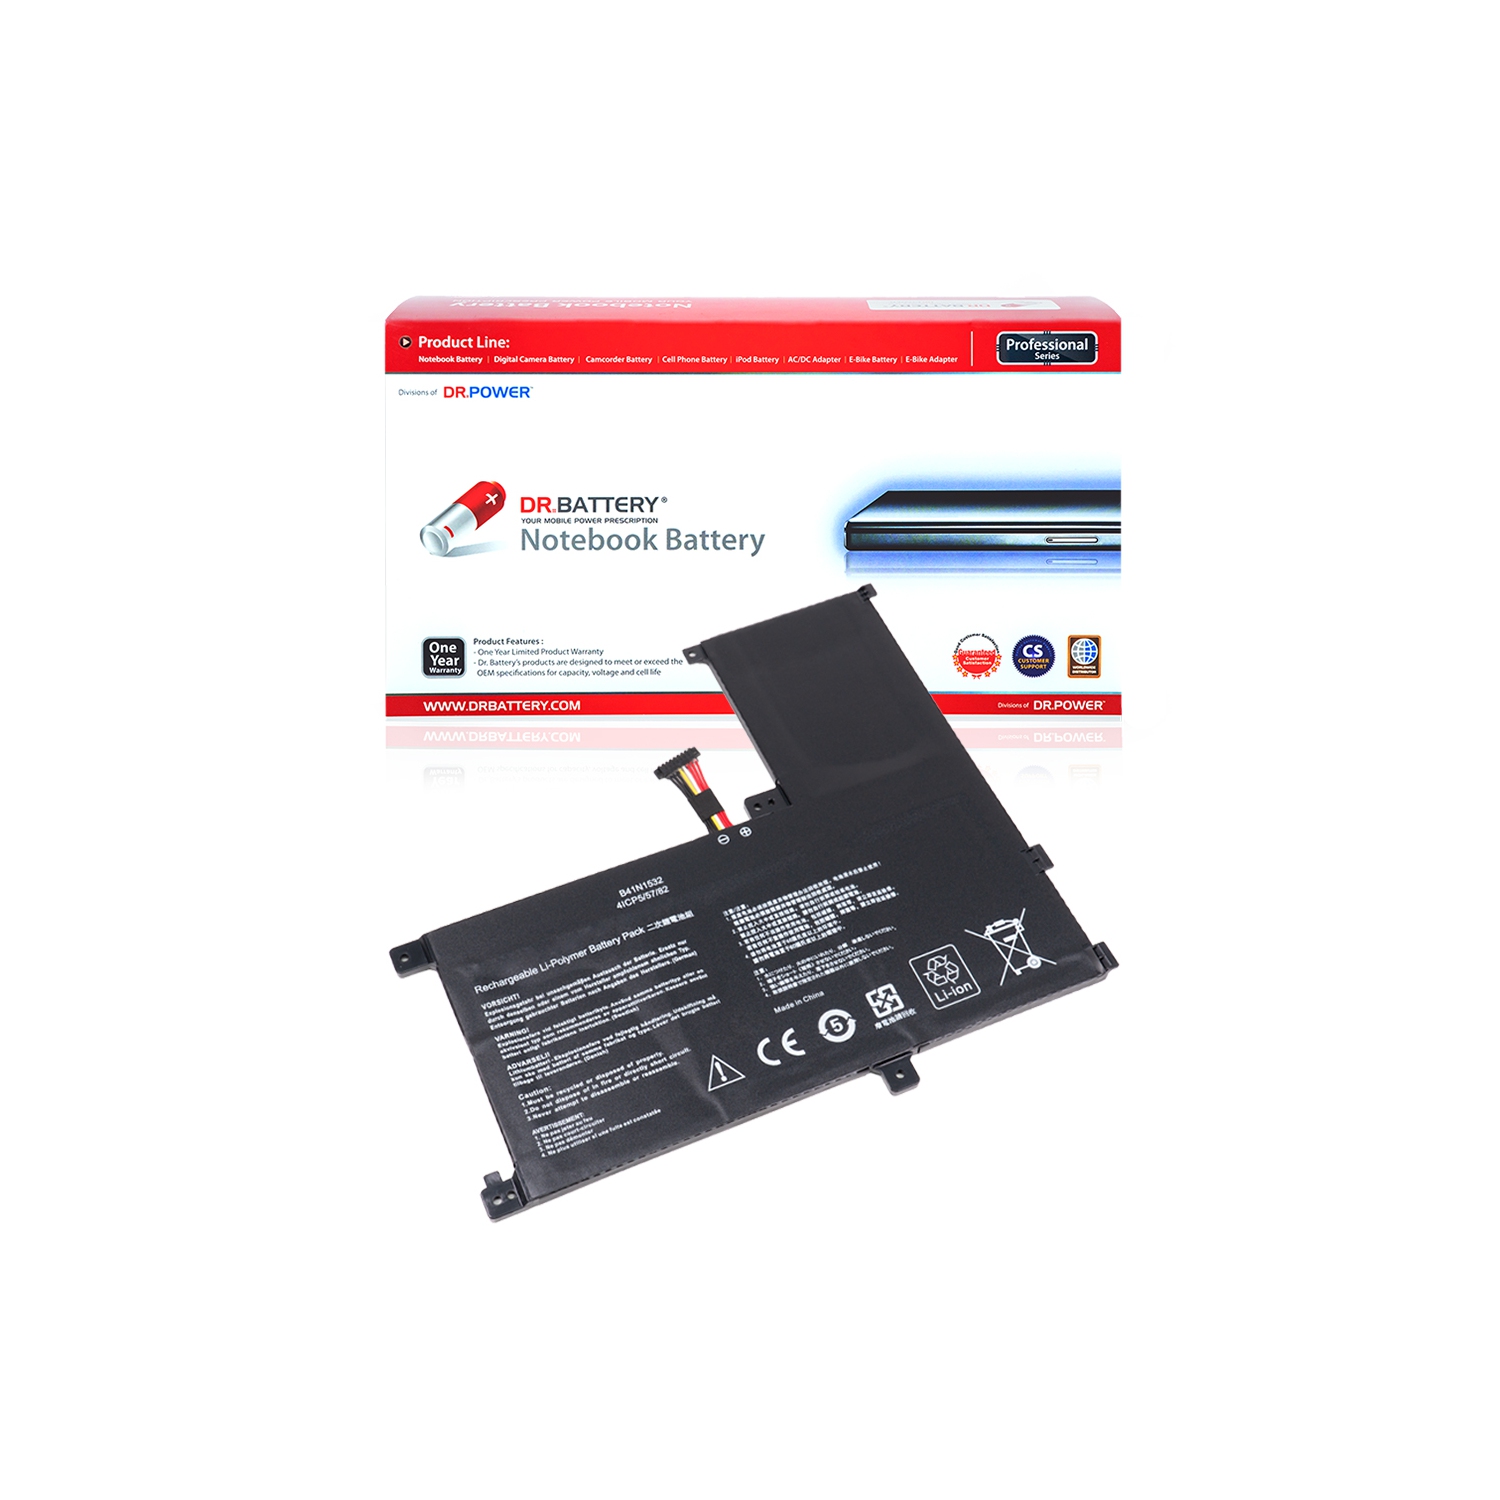 DR. BATTERY - Replacement for Asus Q504UA-BBI5T12 / Q504UA-BHI5T13 / Q504UA-BHI7T21 / Q504UA-BI5T26 / 4ICP5 / 57 / 82